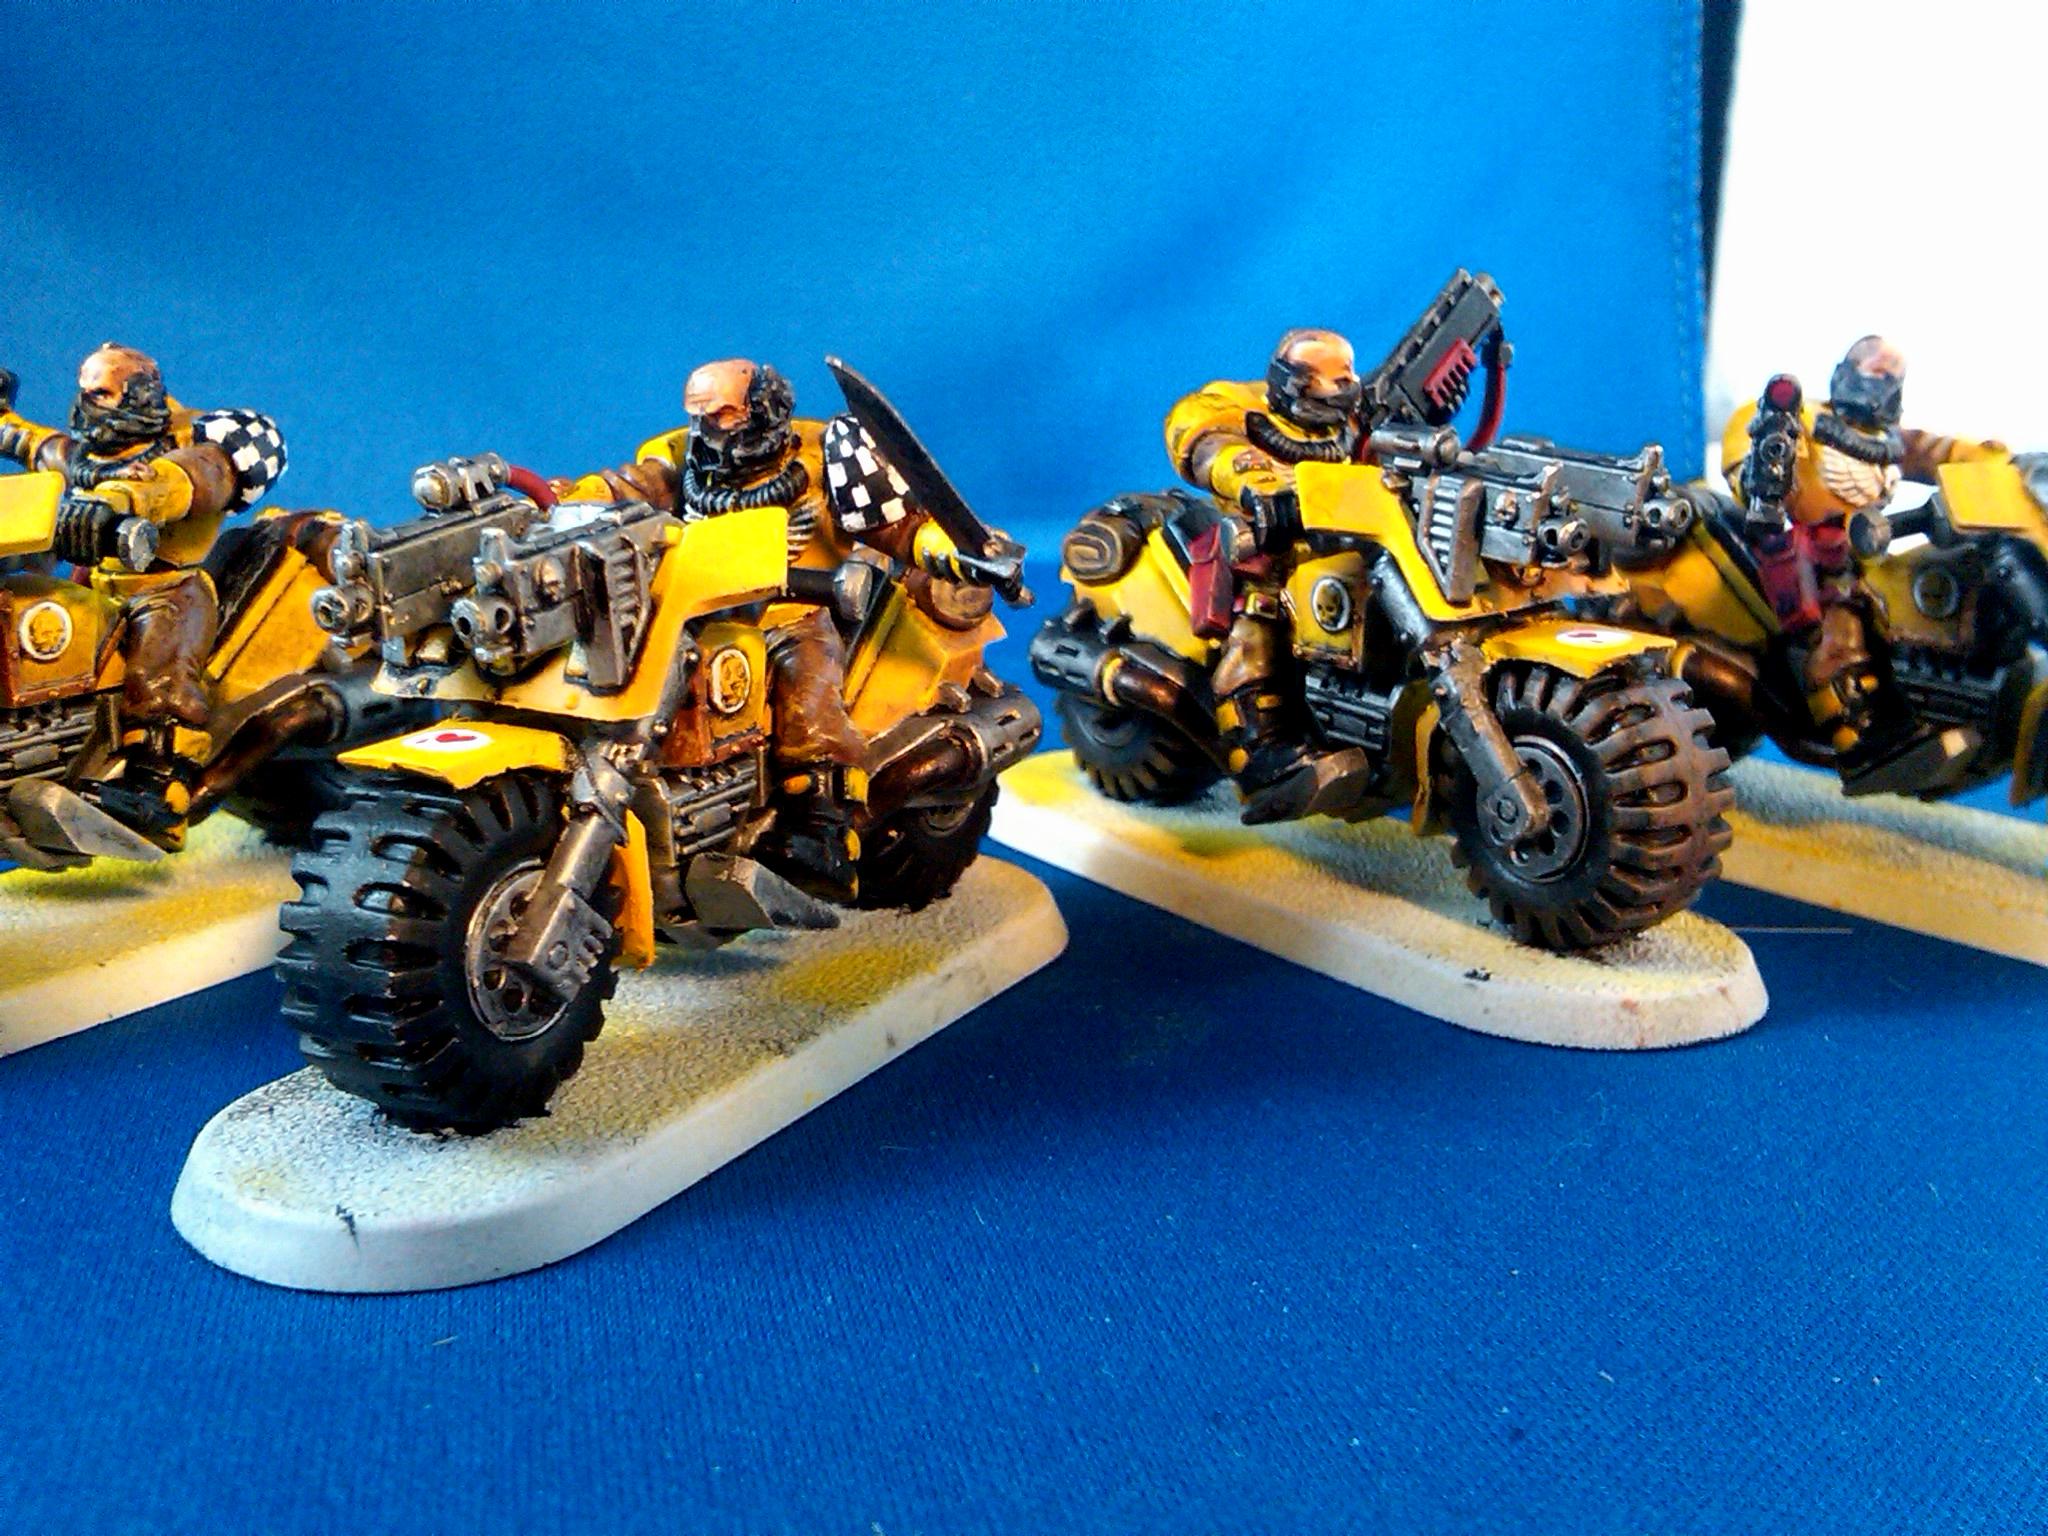 Bike, Imperial Fists, Scouts, Space Marines